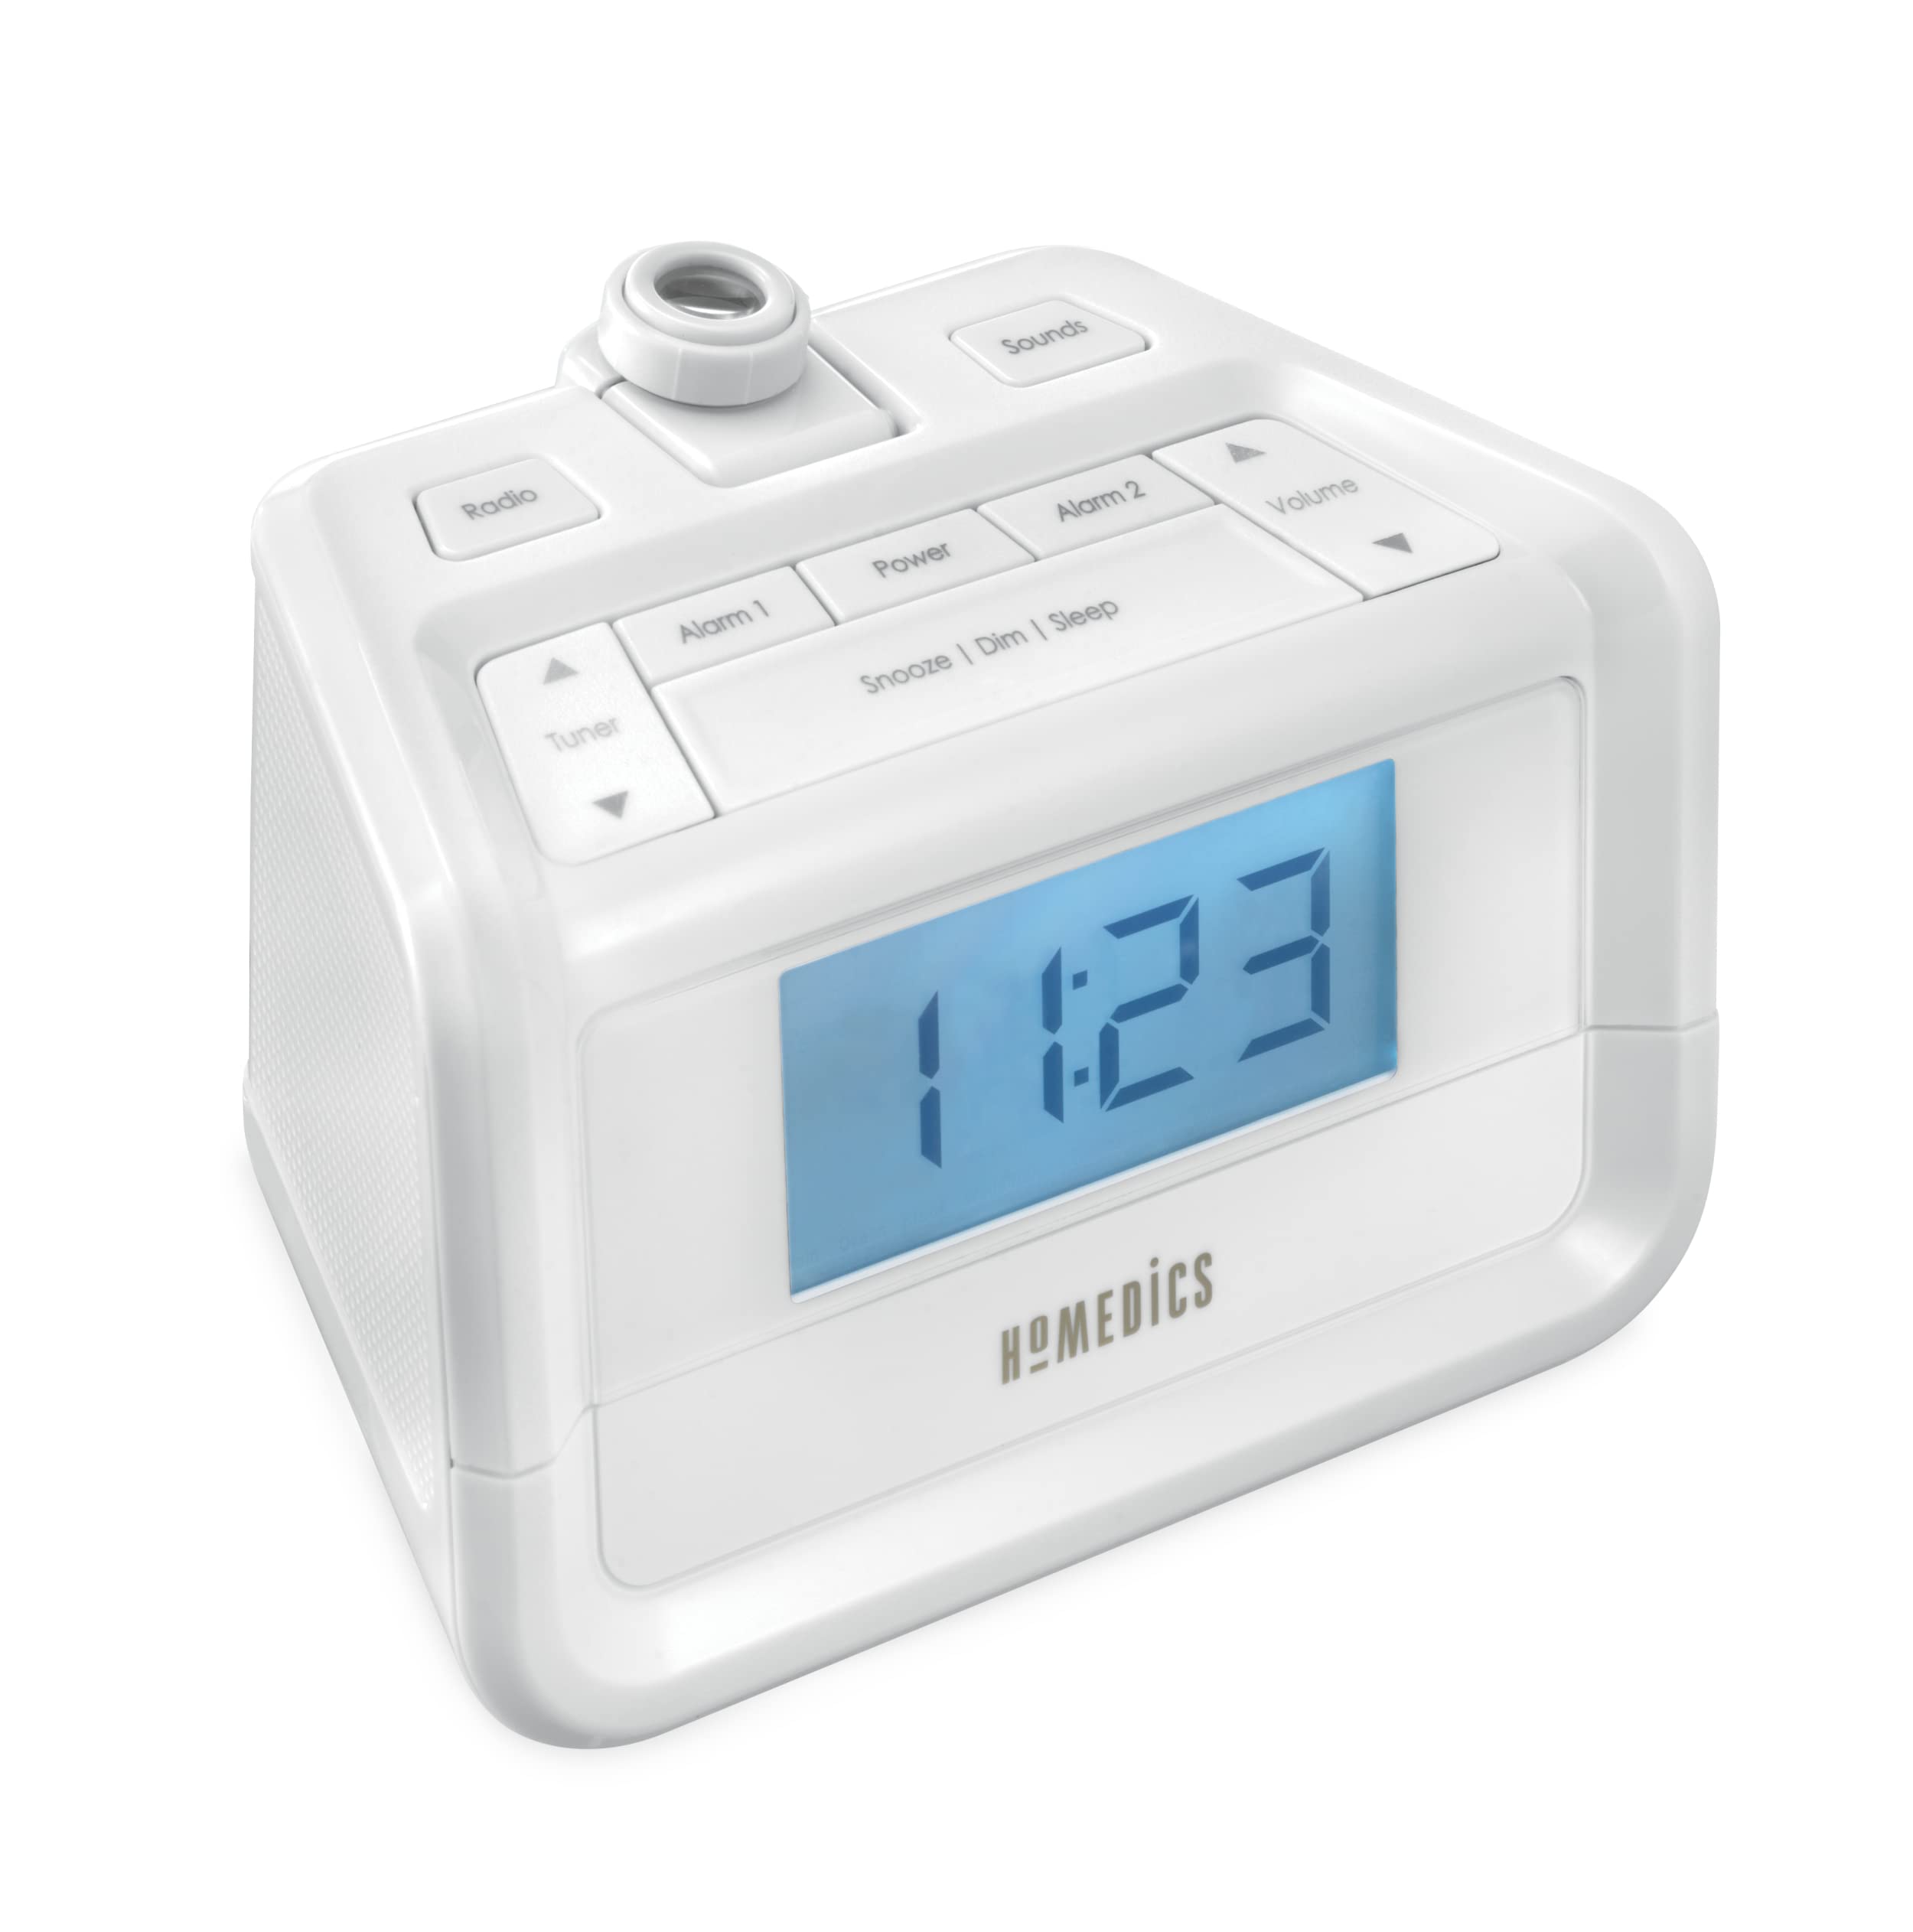 Homedics Sound Machine and Alarm Clock with Time Projection